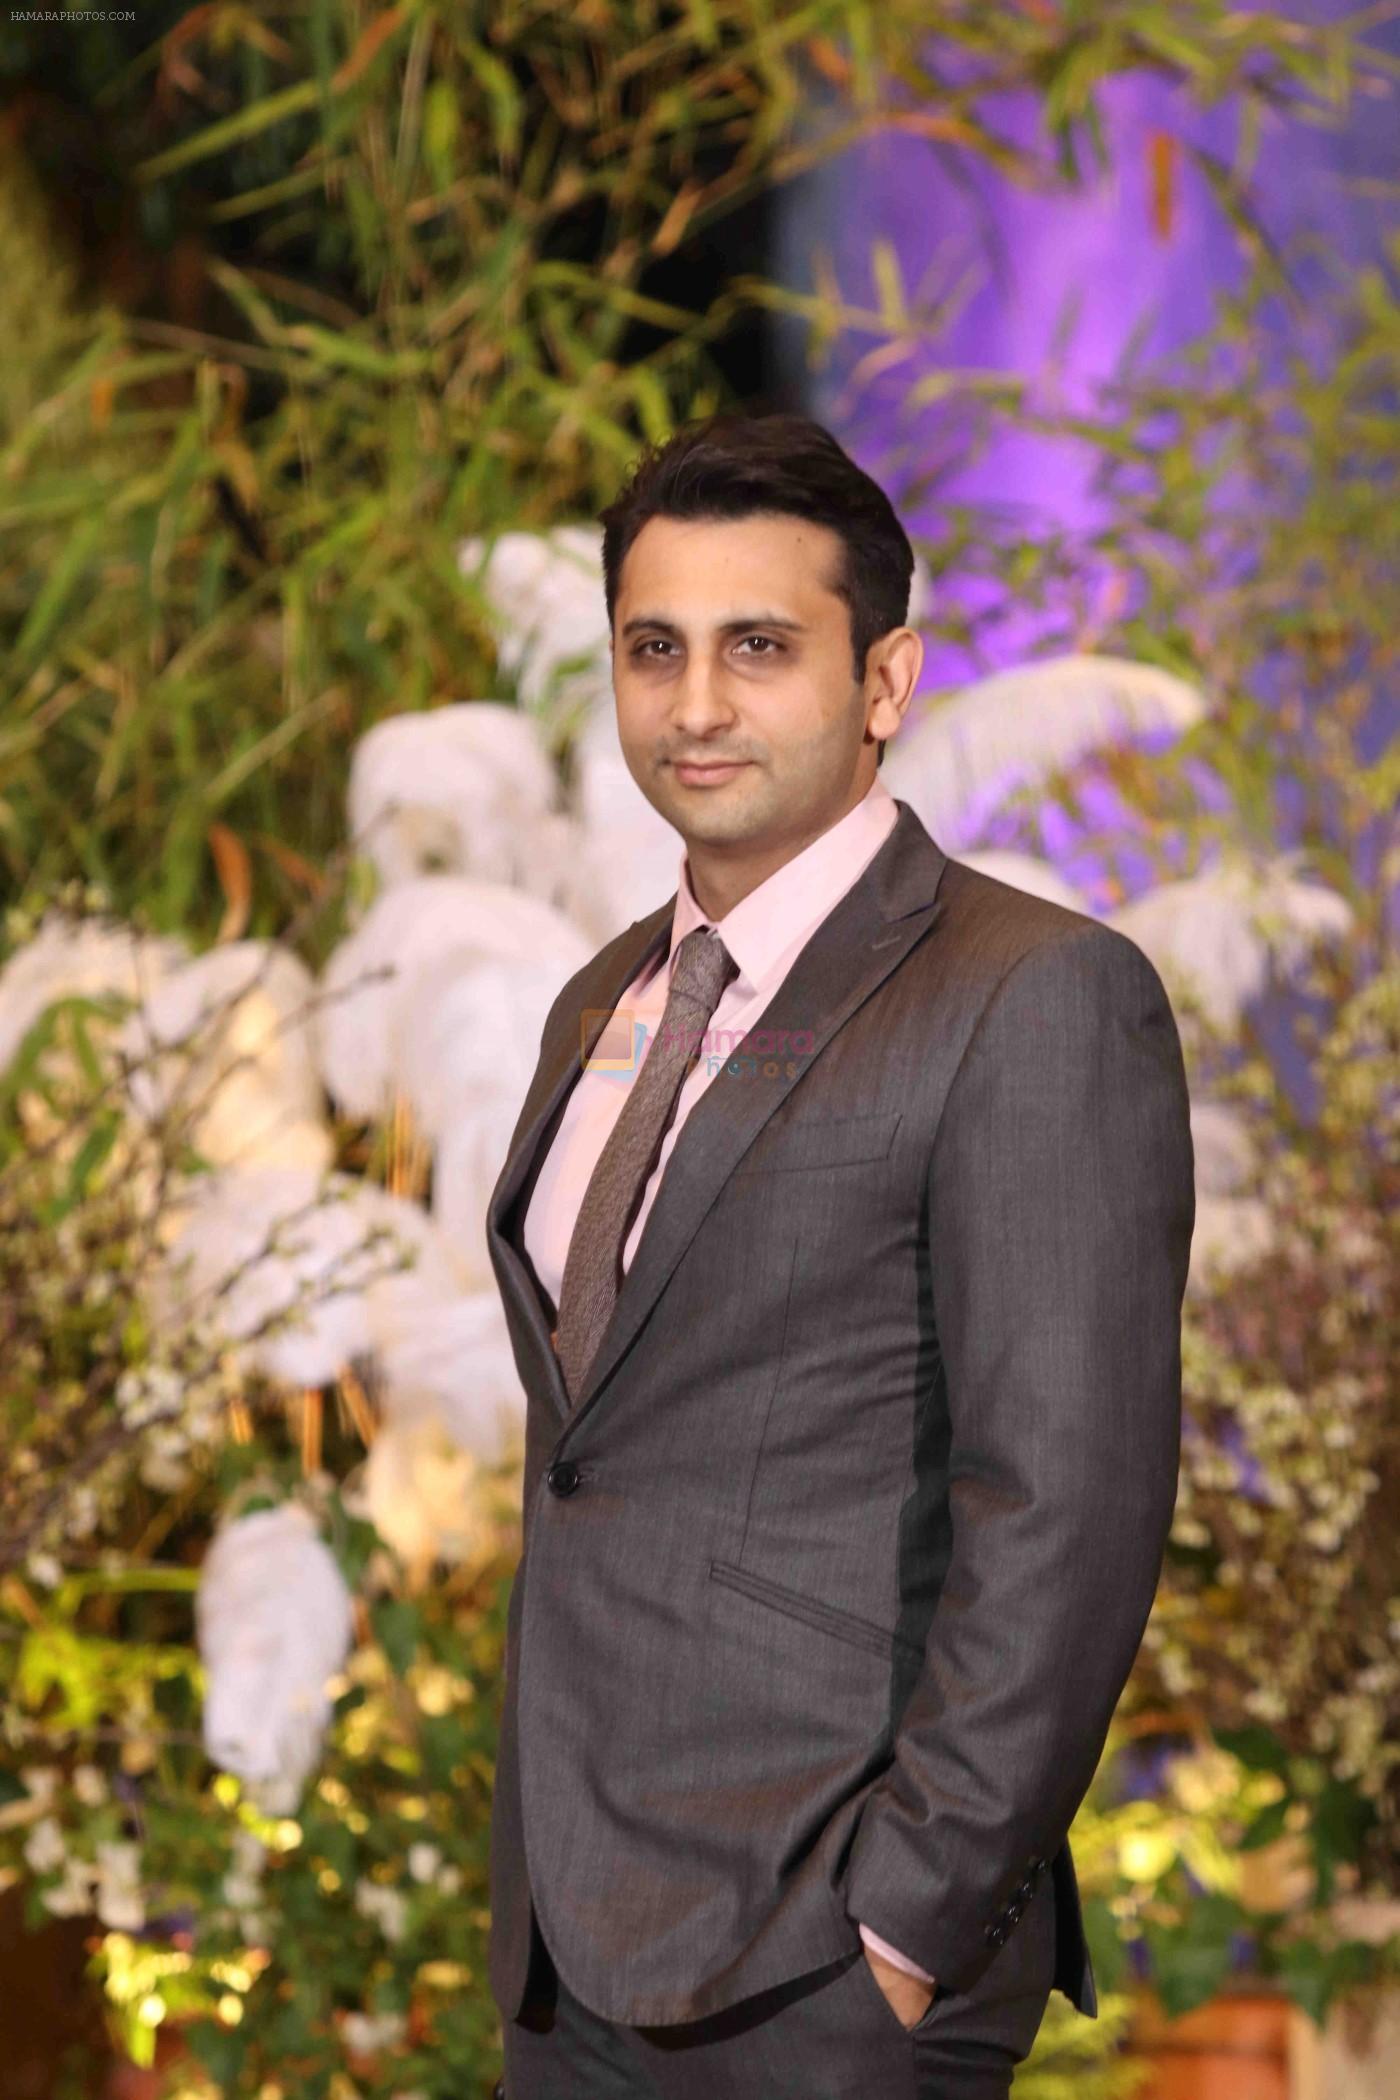 at Sonam Kapoor and Anand Ahuja's Wedding Reception on 8th May 2018